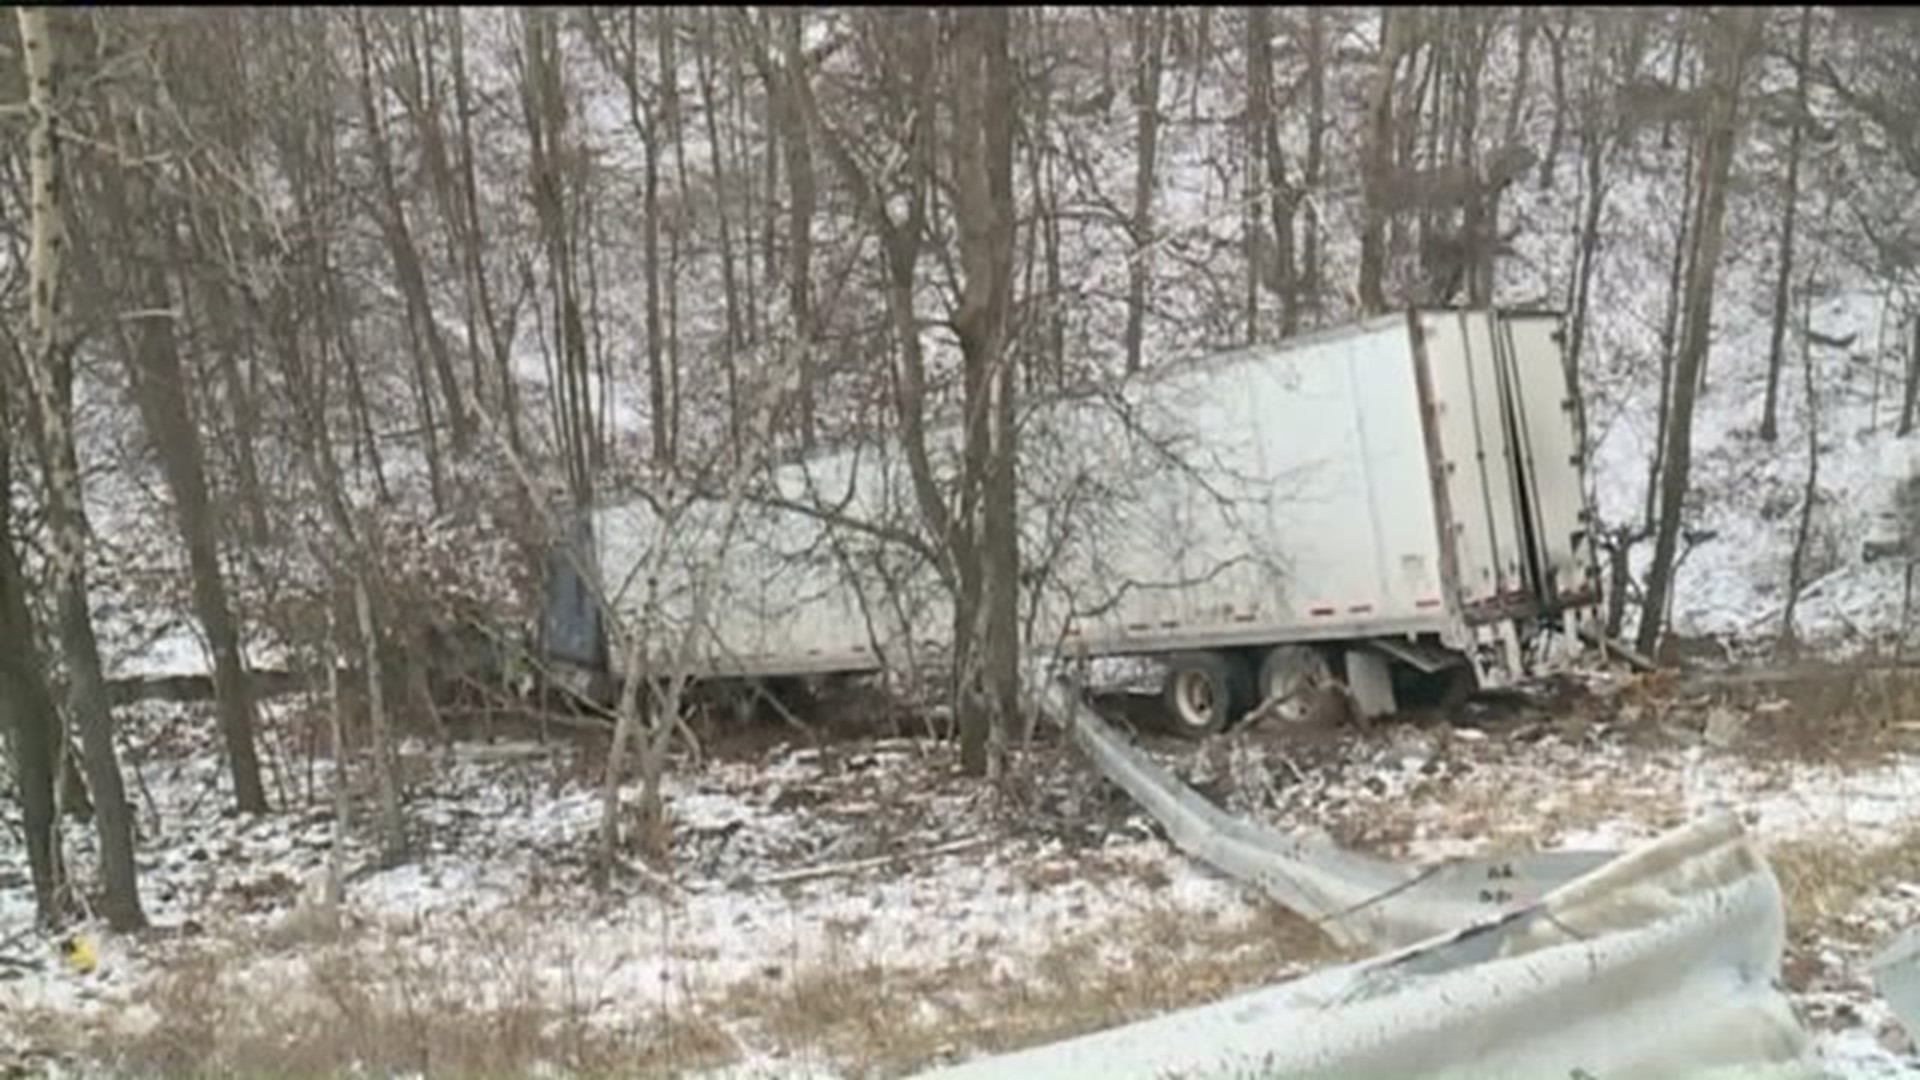 Truck Crashes through Guide Rail on I-81 in Schuylkill County